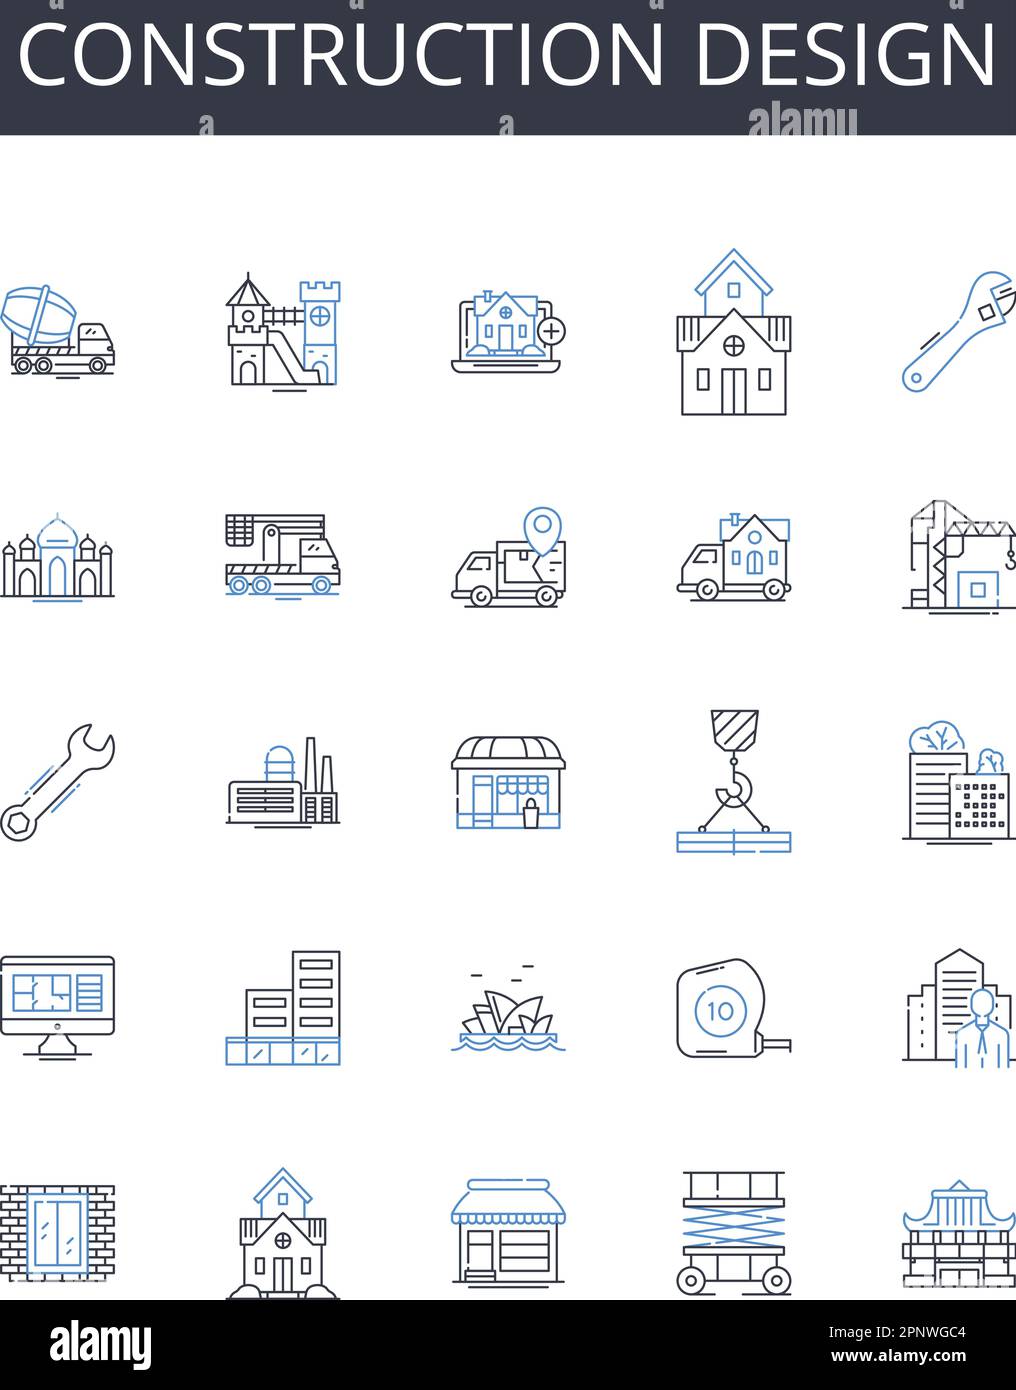 Construction design line icons collection. Building planning ...